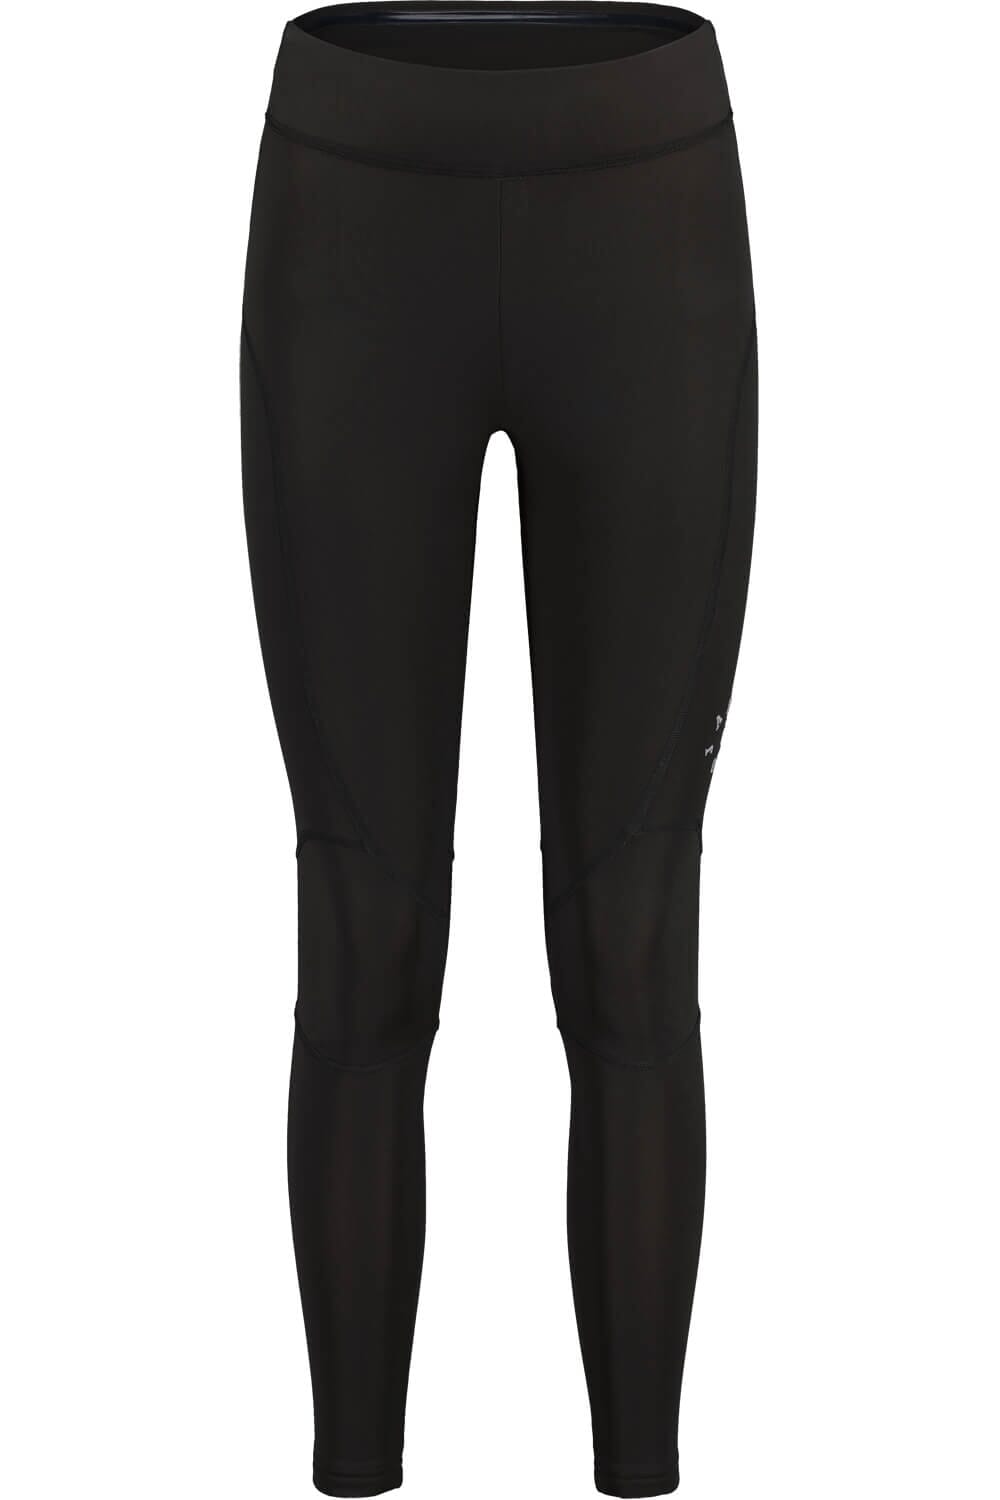 Maloja - W's ForcolaM. Adventure Thermal Tights - Recycled Nylon & Recycled Spandex - Weekendbee - sustainable sportswear